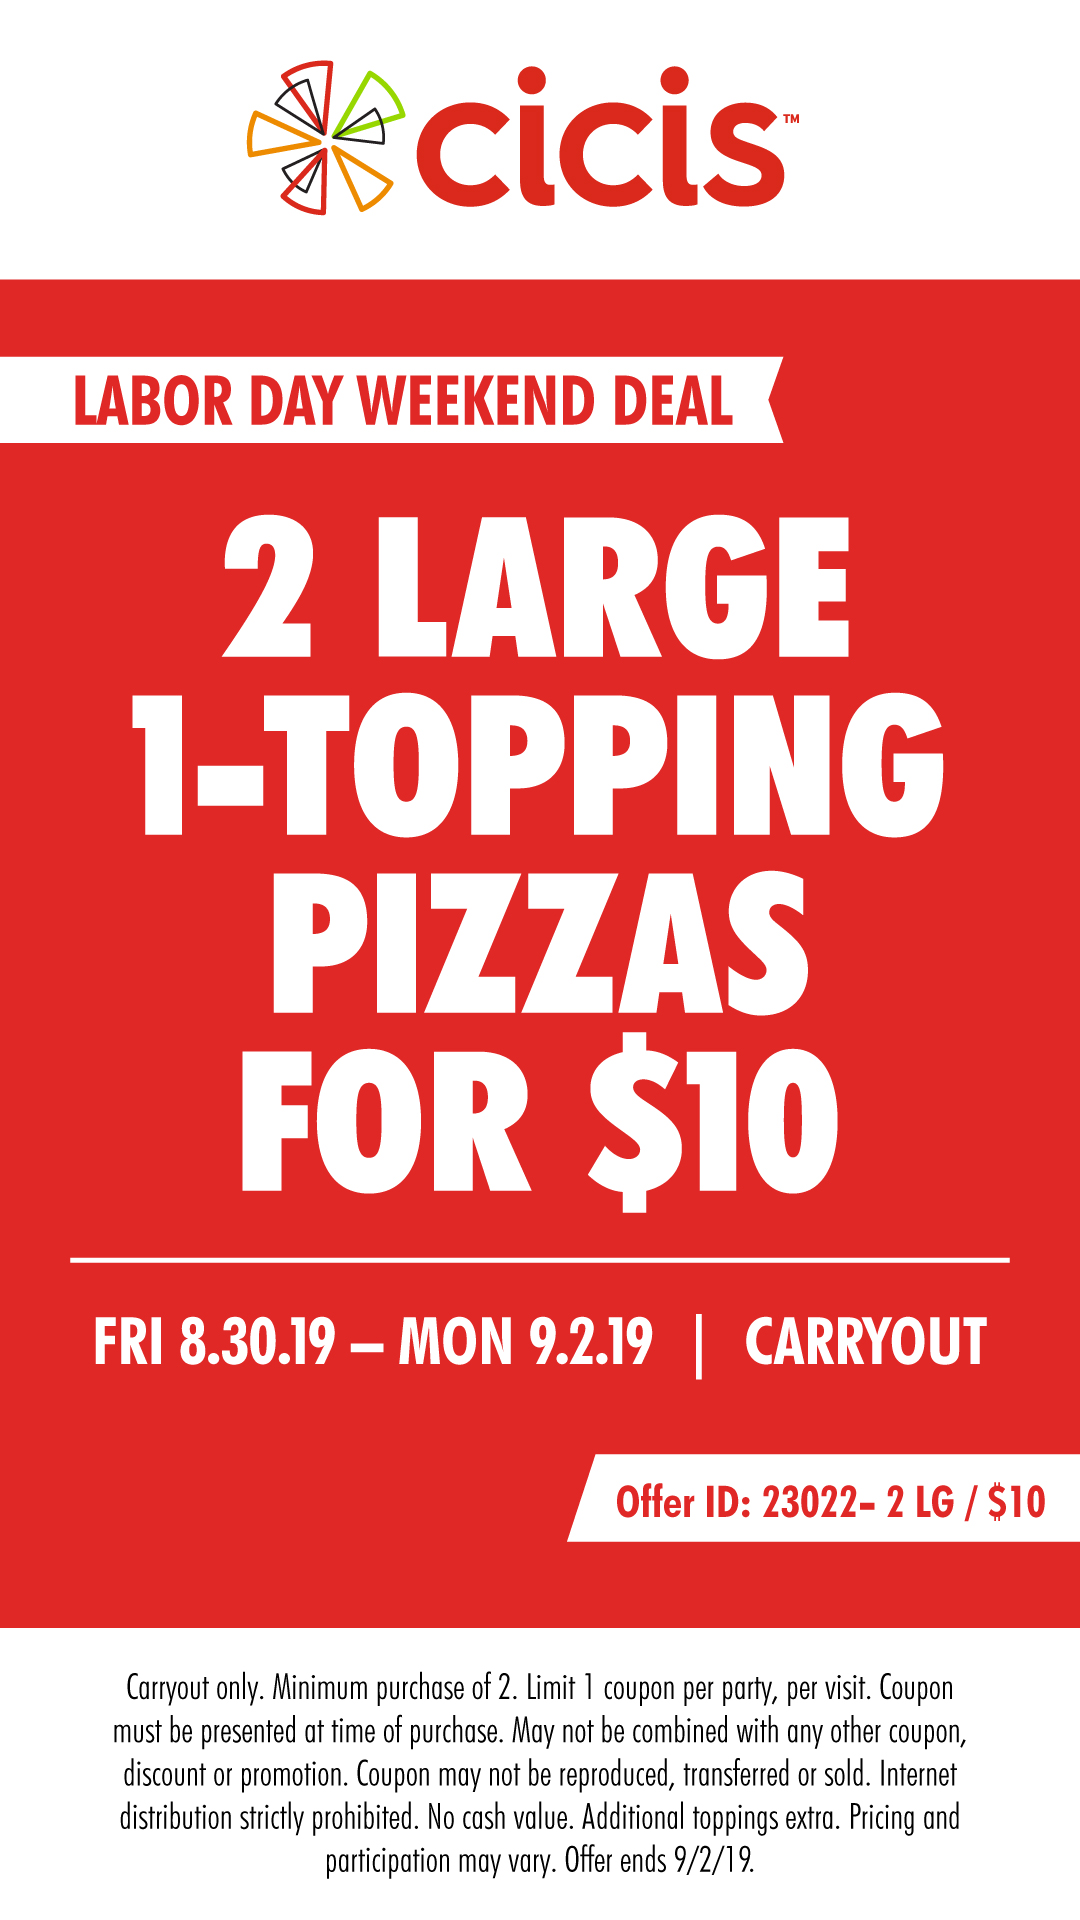 Cicis Pizza coupons & promo code for [May 2022]